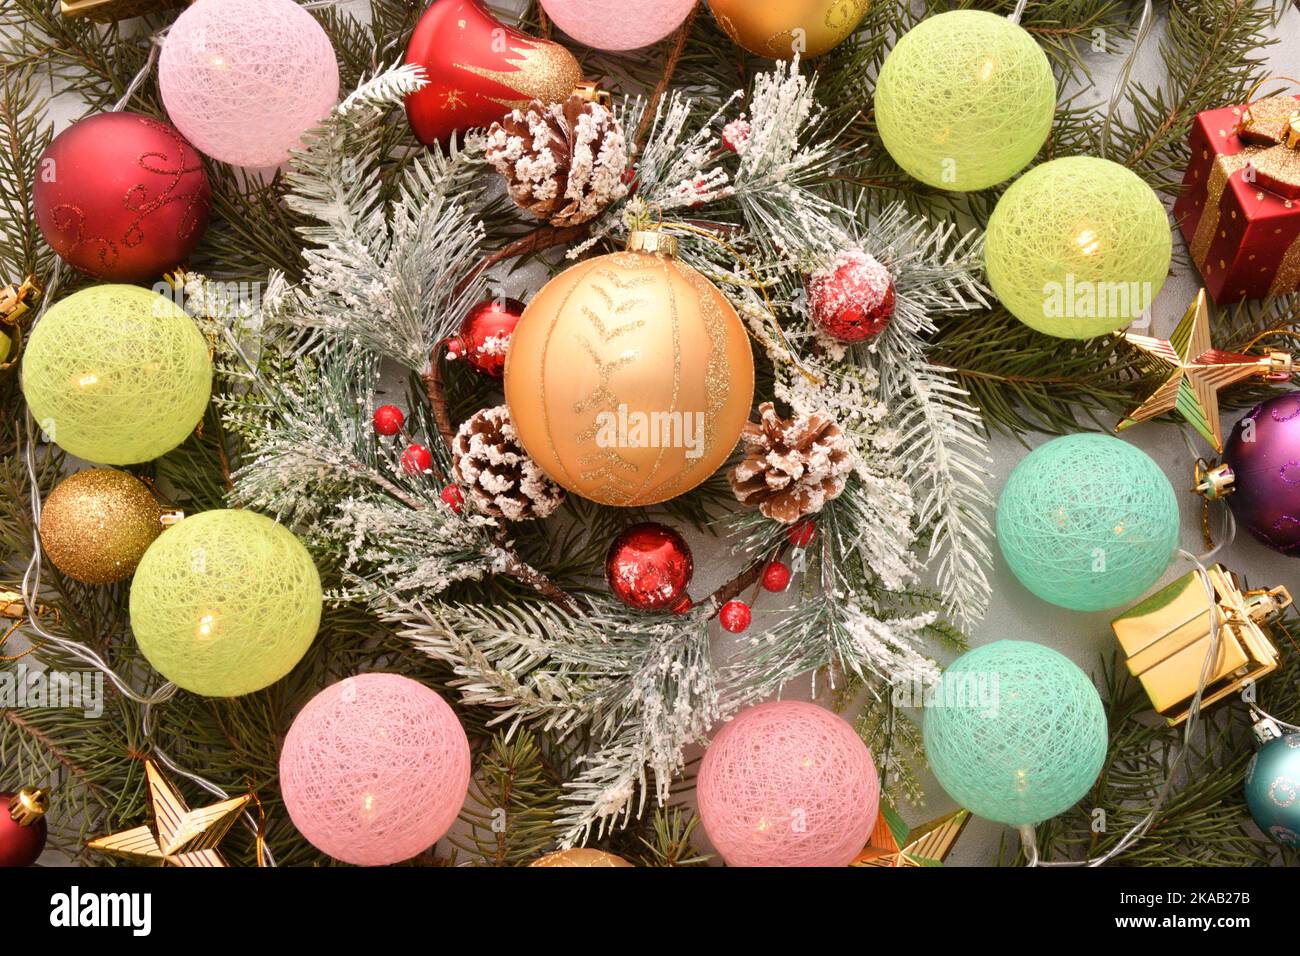 Colorful Christmas garland and decorative decorations for the Christmas tree Stock Photo